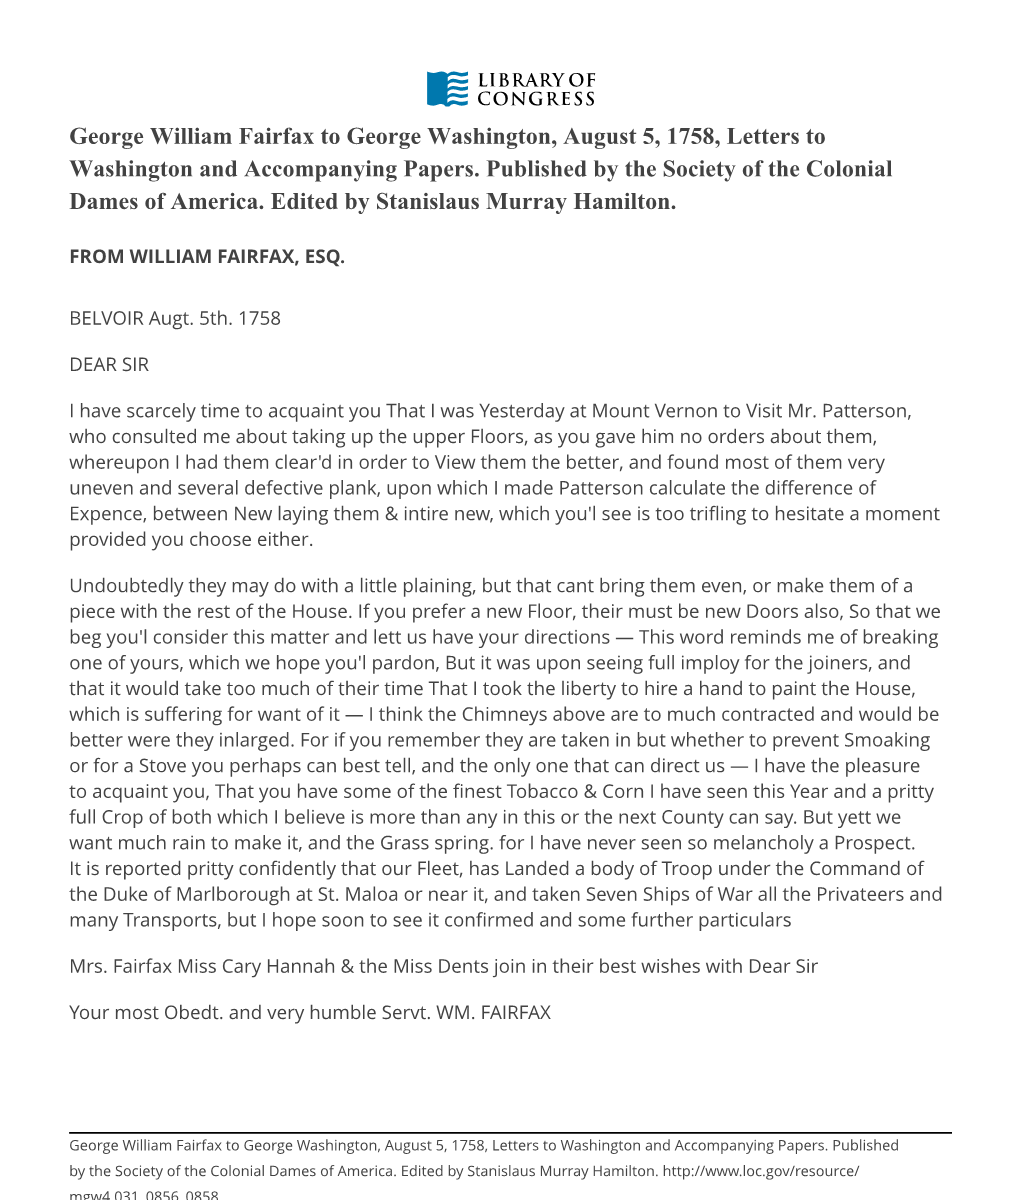 George William Fairfax to George Washington, August 5, 1758, Letters to Washington and Accompanying Papers